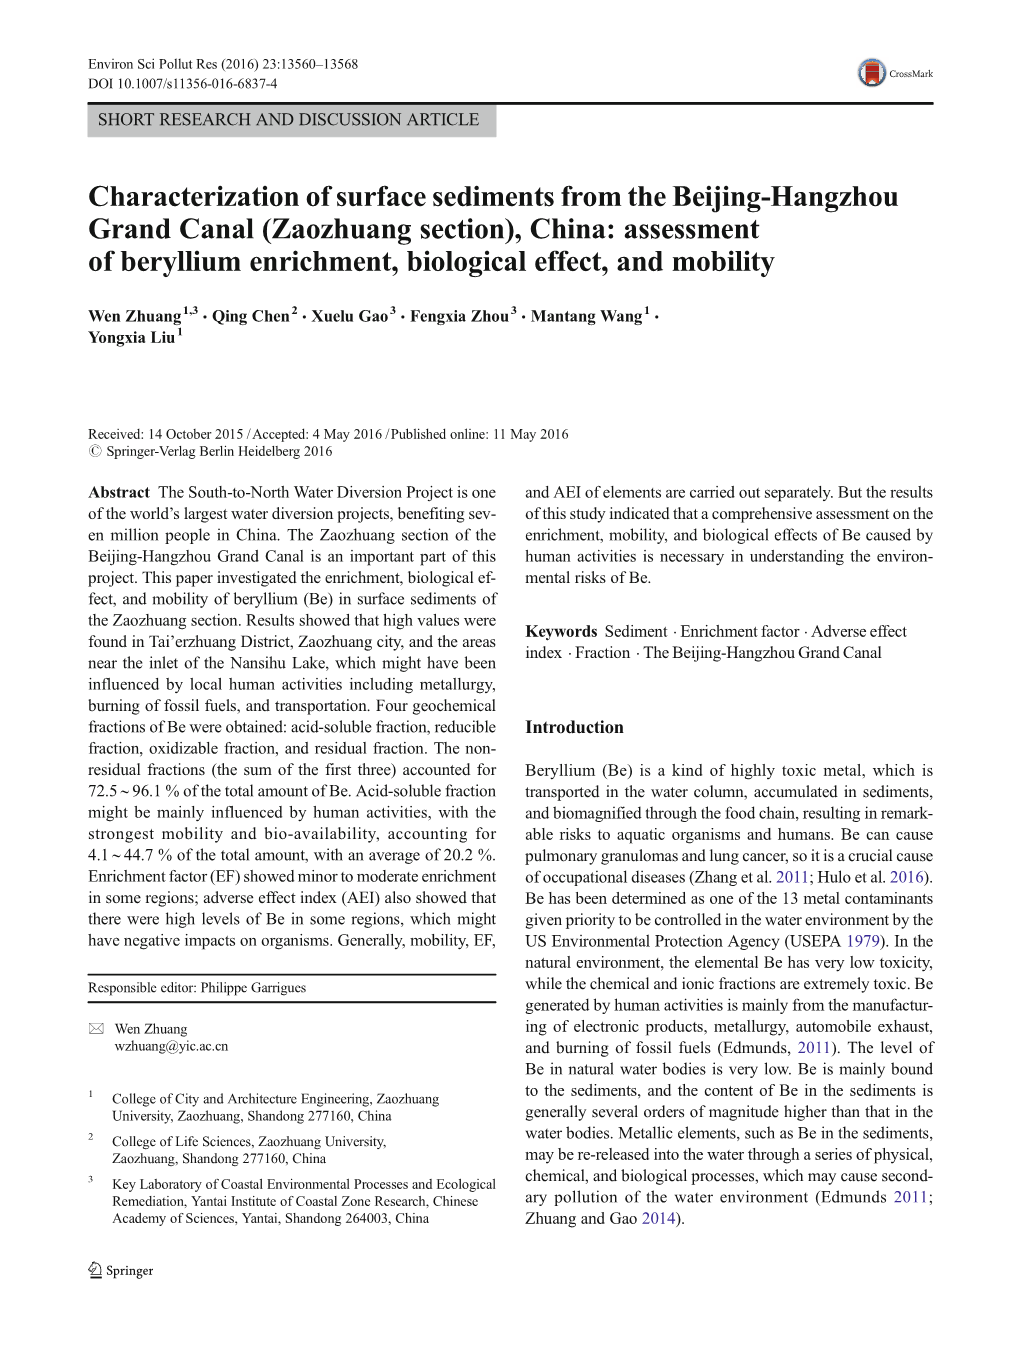 Characterization of Surface Sediments from the Beijing-Hangzhou Grand